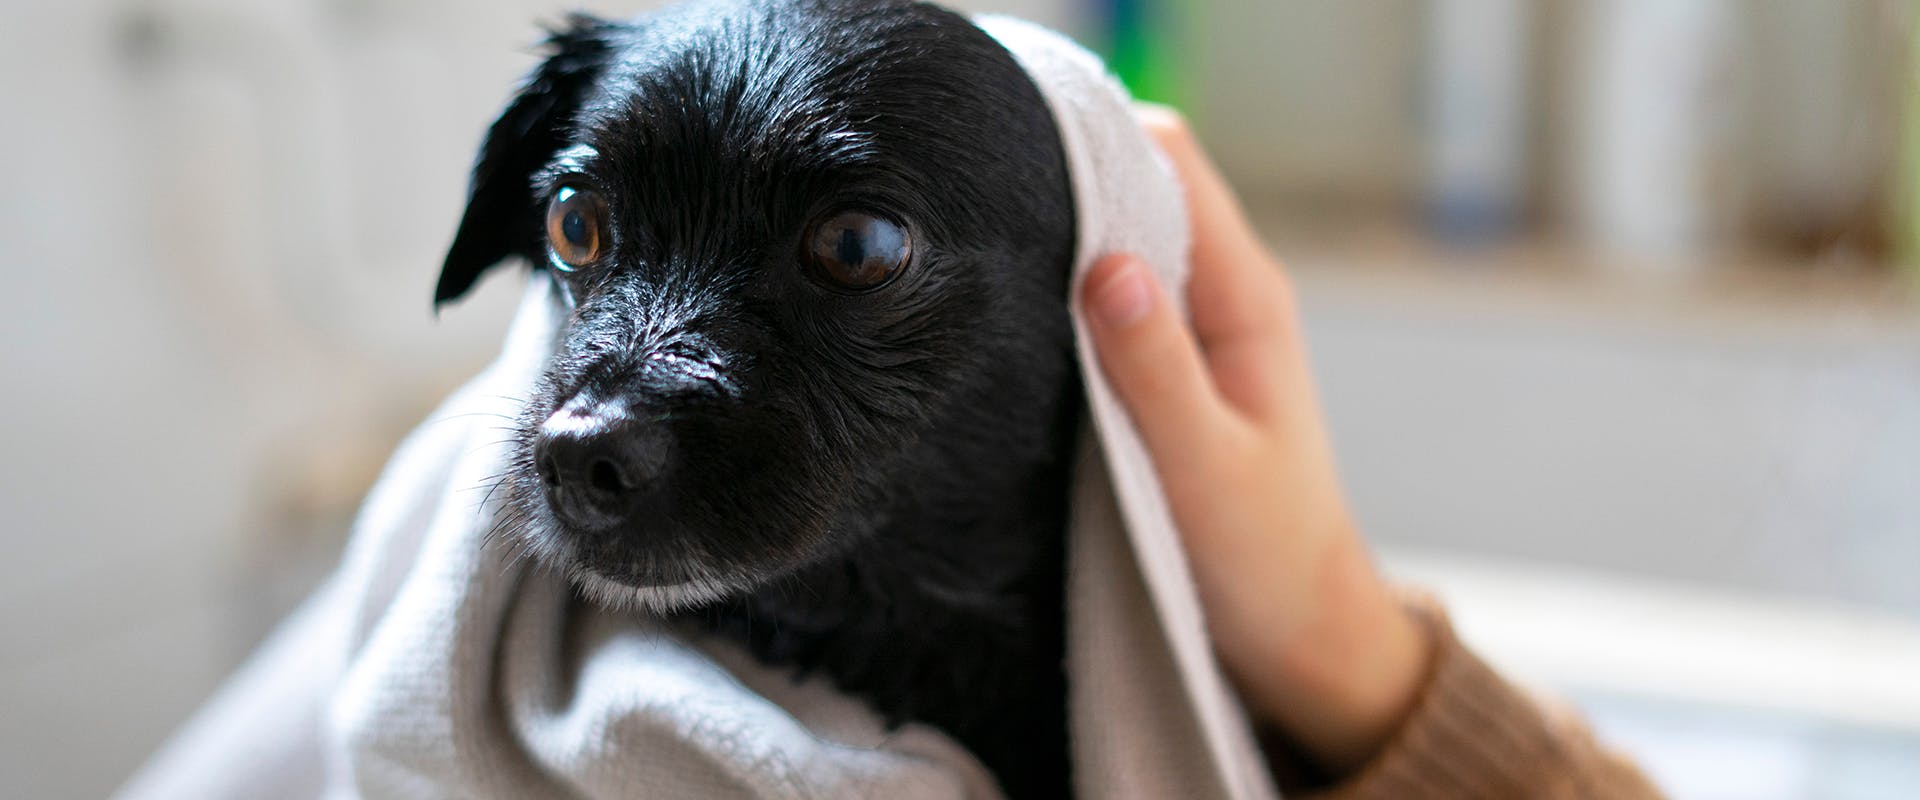 A small wet black dog, a soft towel around it's head and body